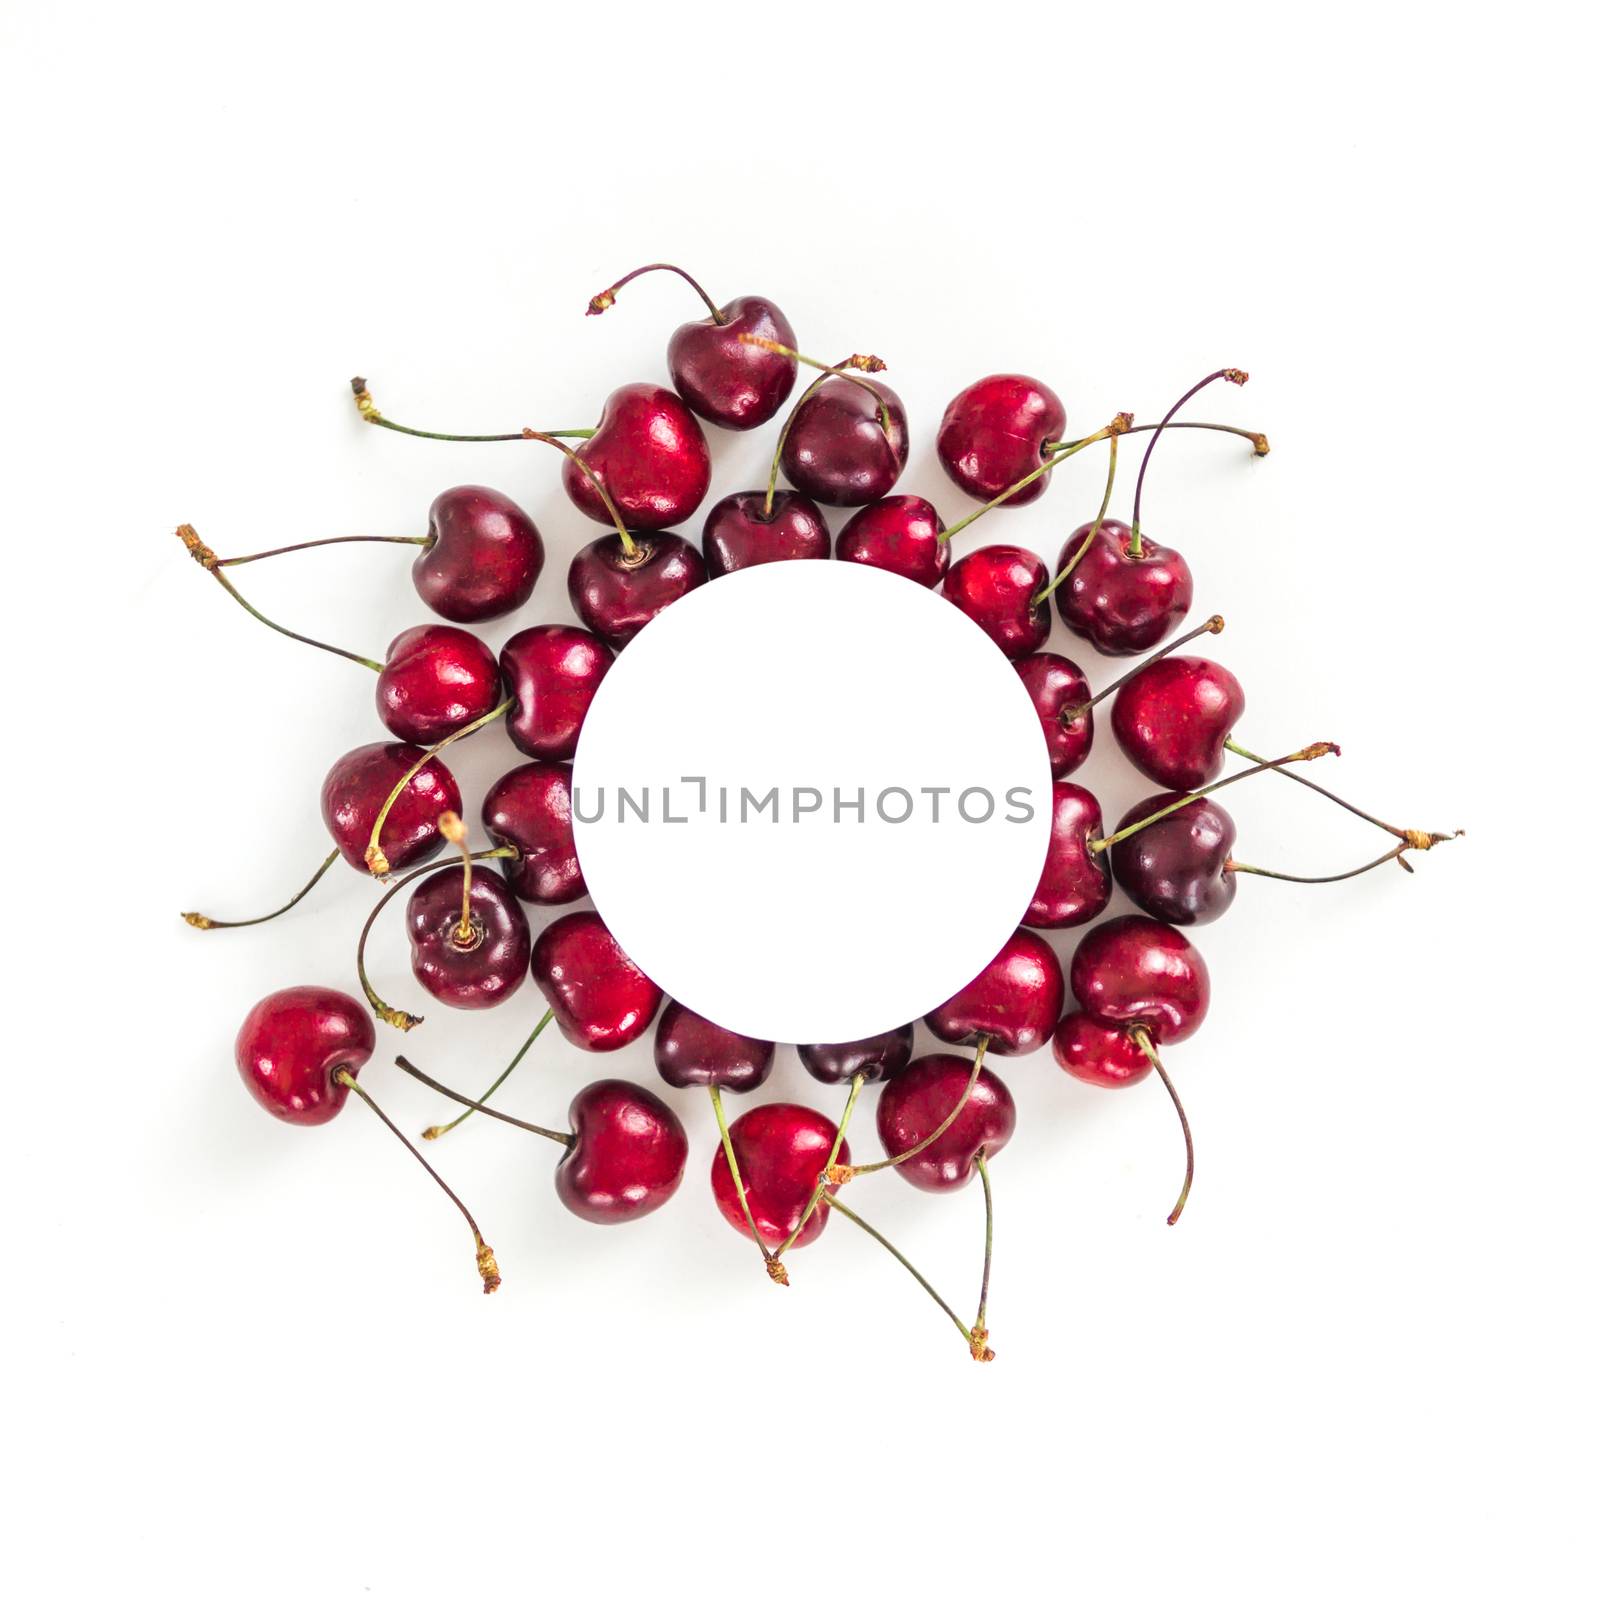 Creative layout with fresh ripe berries. cherry isolated on white background with white circle for copy space. Can use for your design, promo, social media, Top view. Instagram format square.